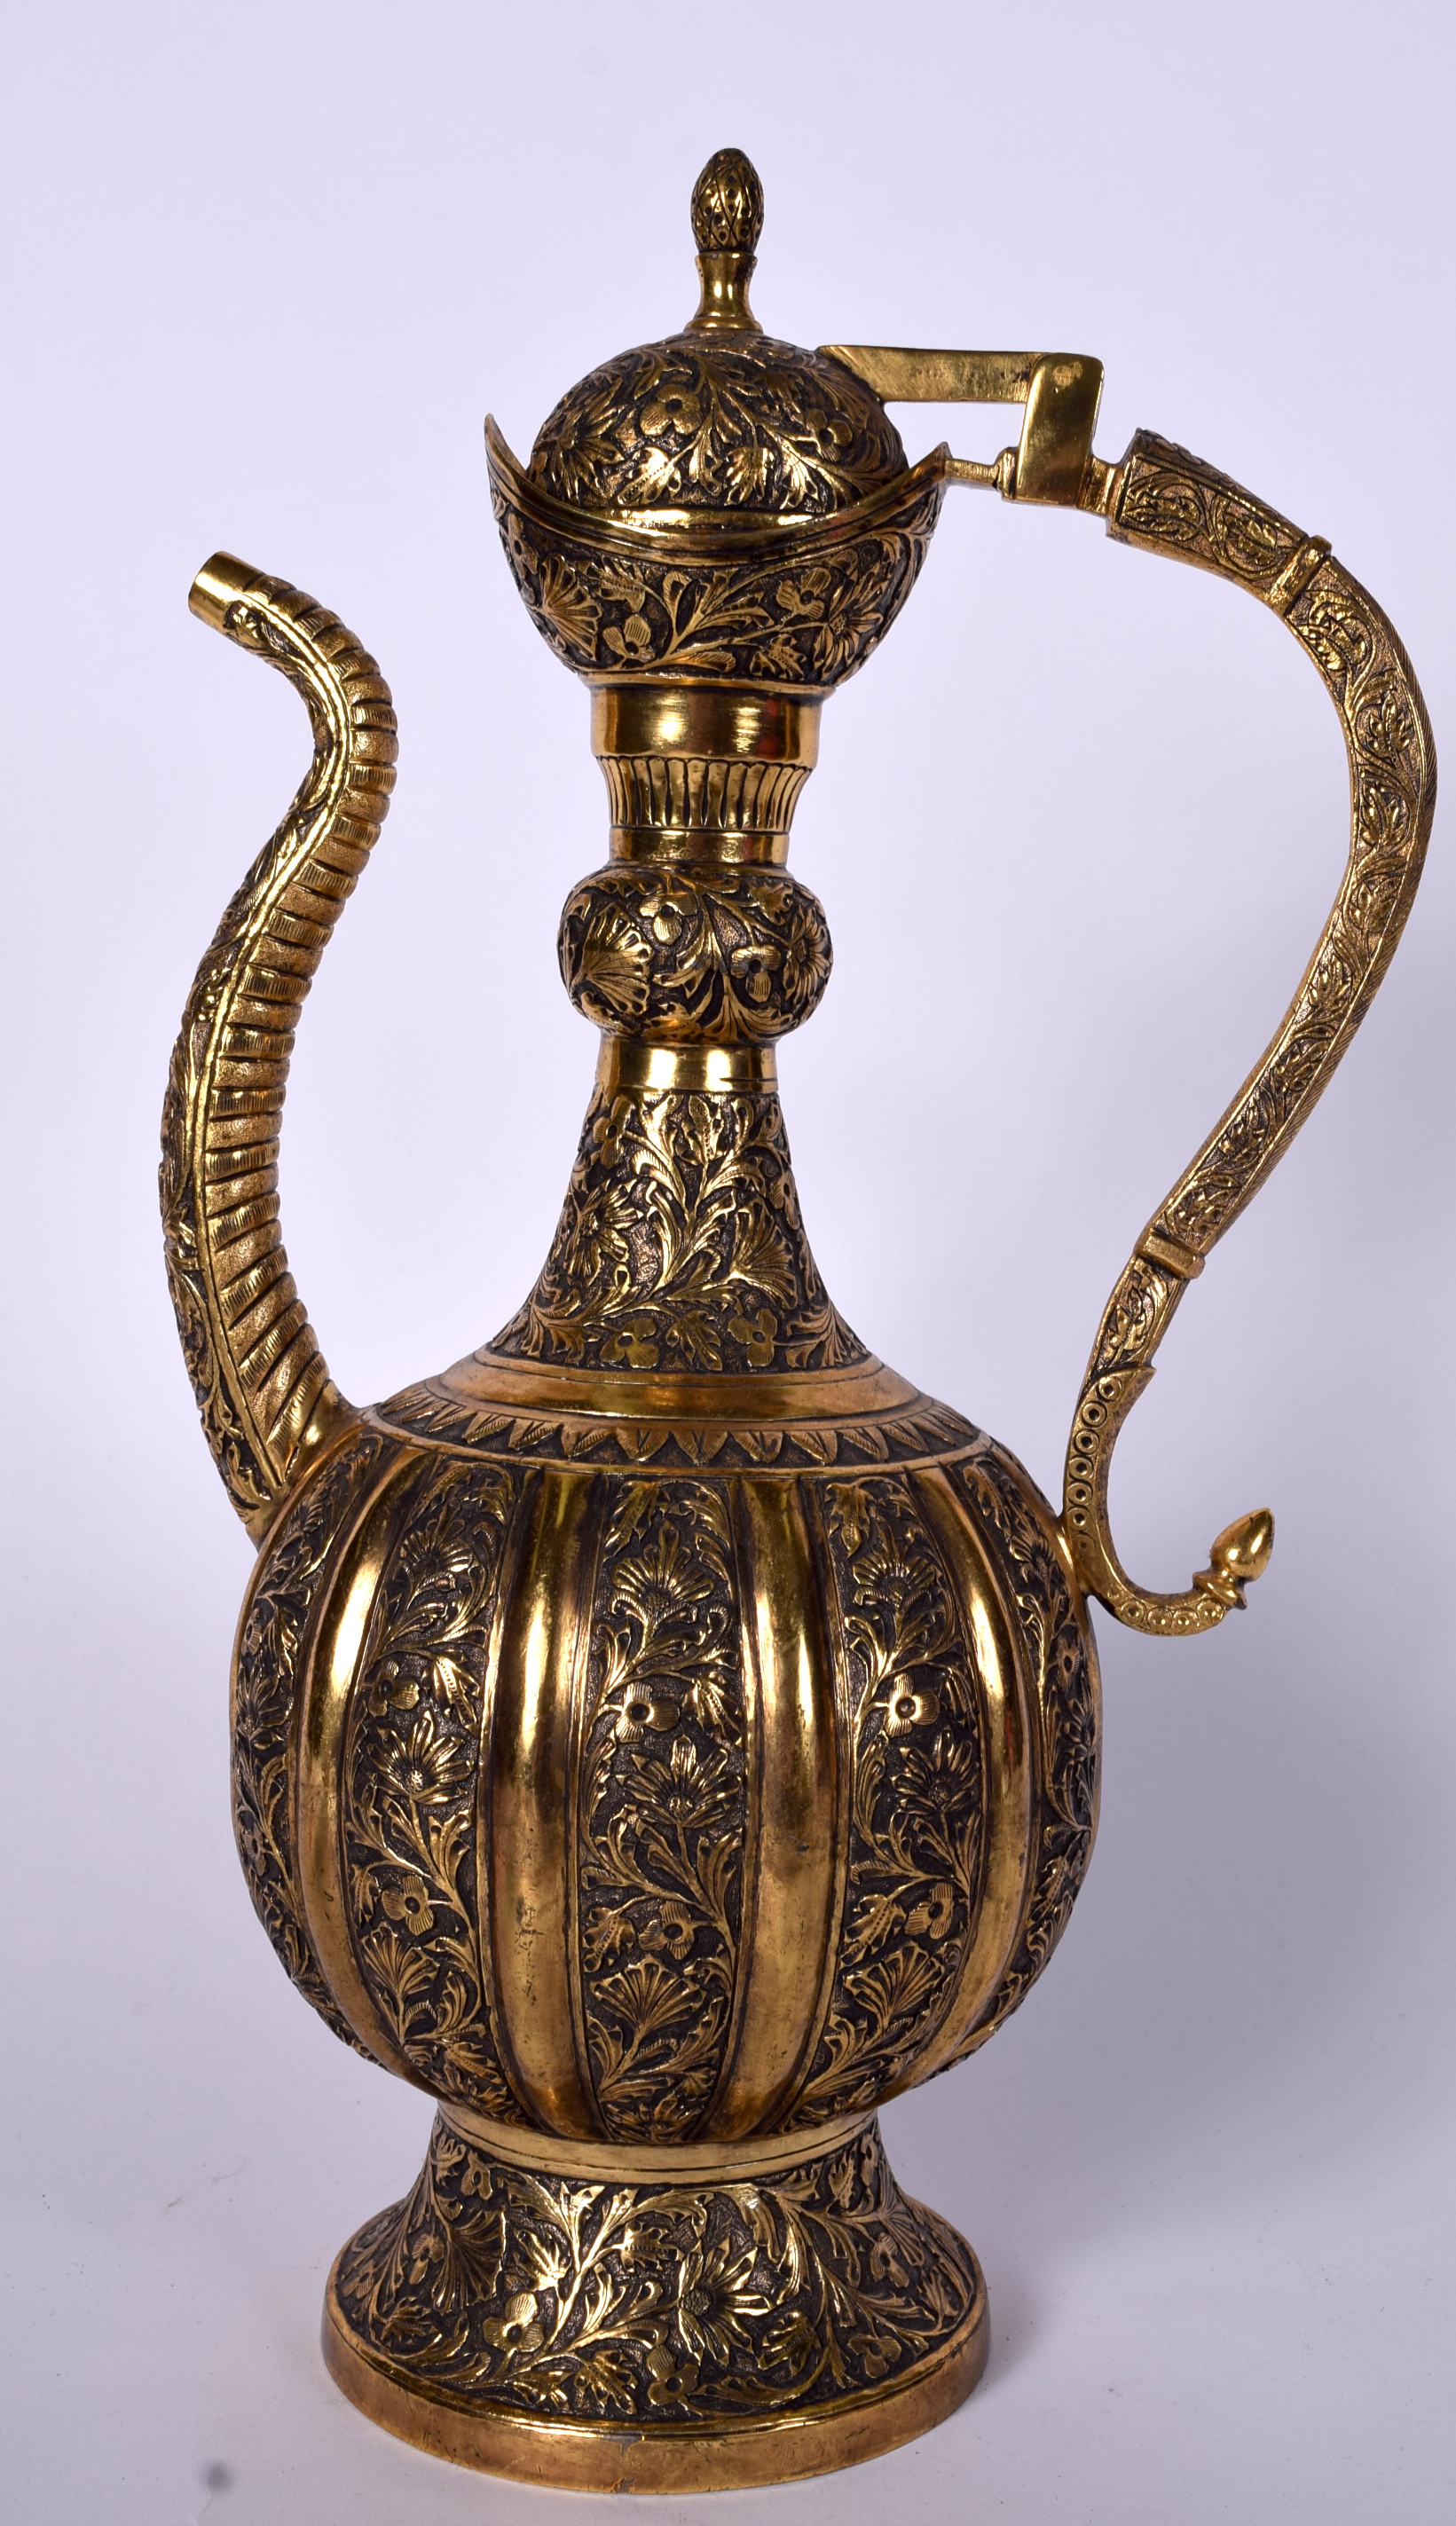 A LARGE ISLAMIC OR PERSIAN GILT BRONZE EWER, decorated with extensive foliage and artichoke finial.